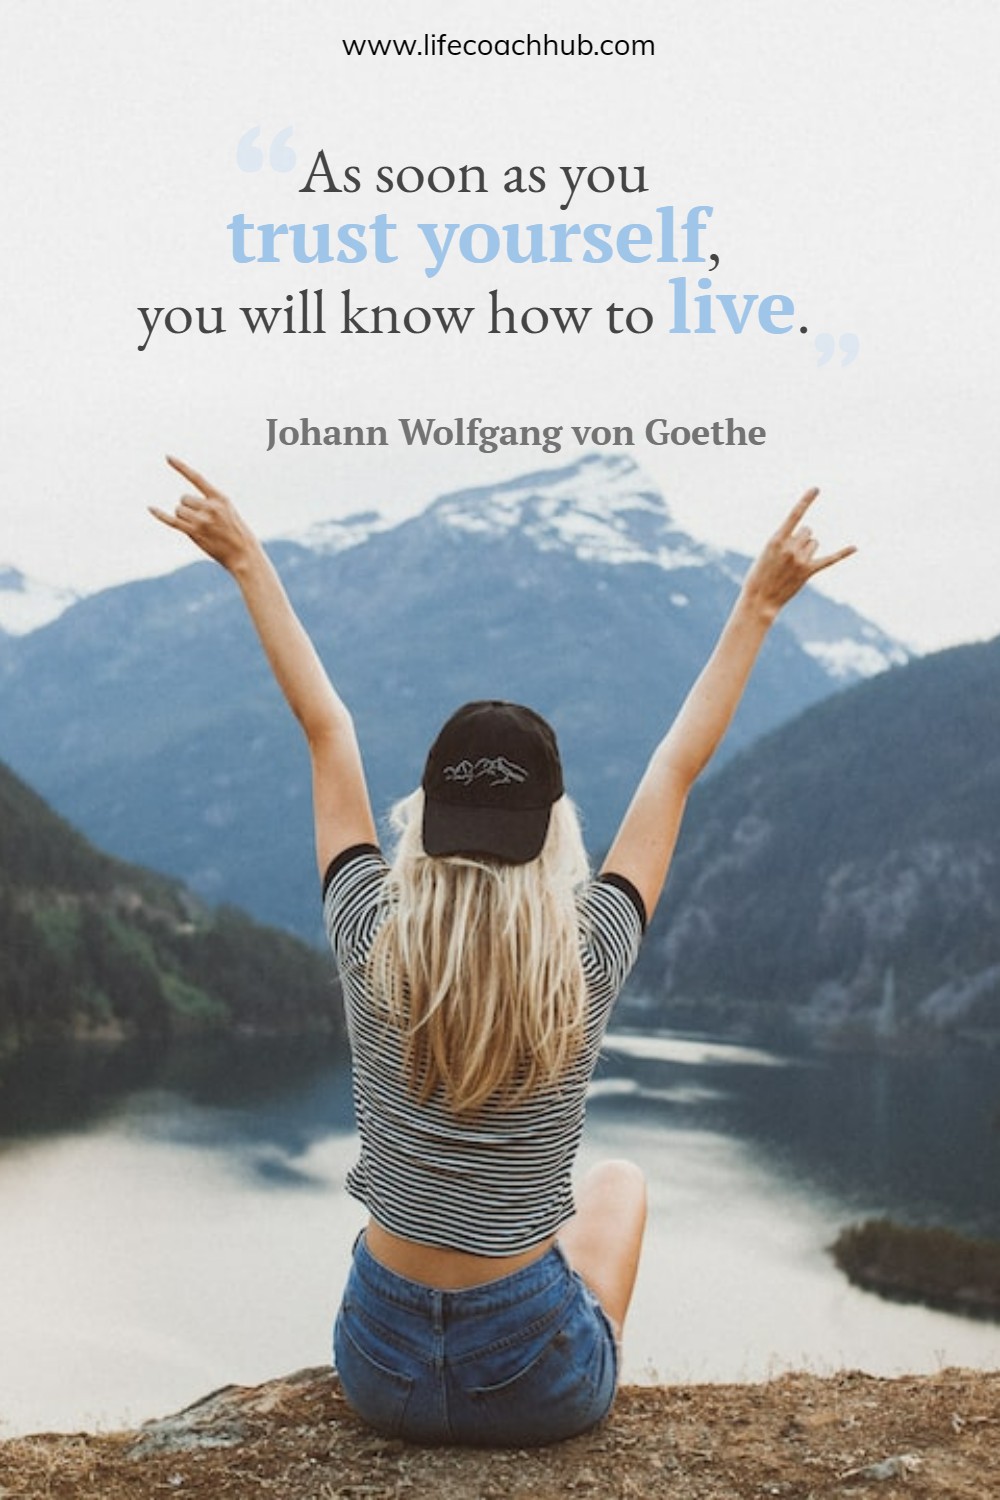 As soon as you trust yourself, you will know how to live. Johann Wolfgang von Goethe Coaching Quote